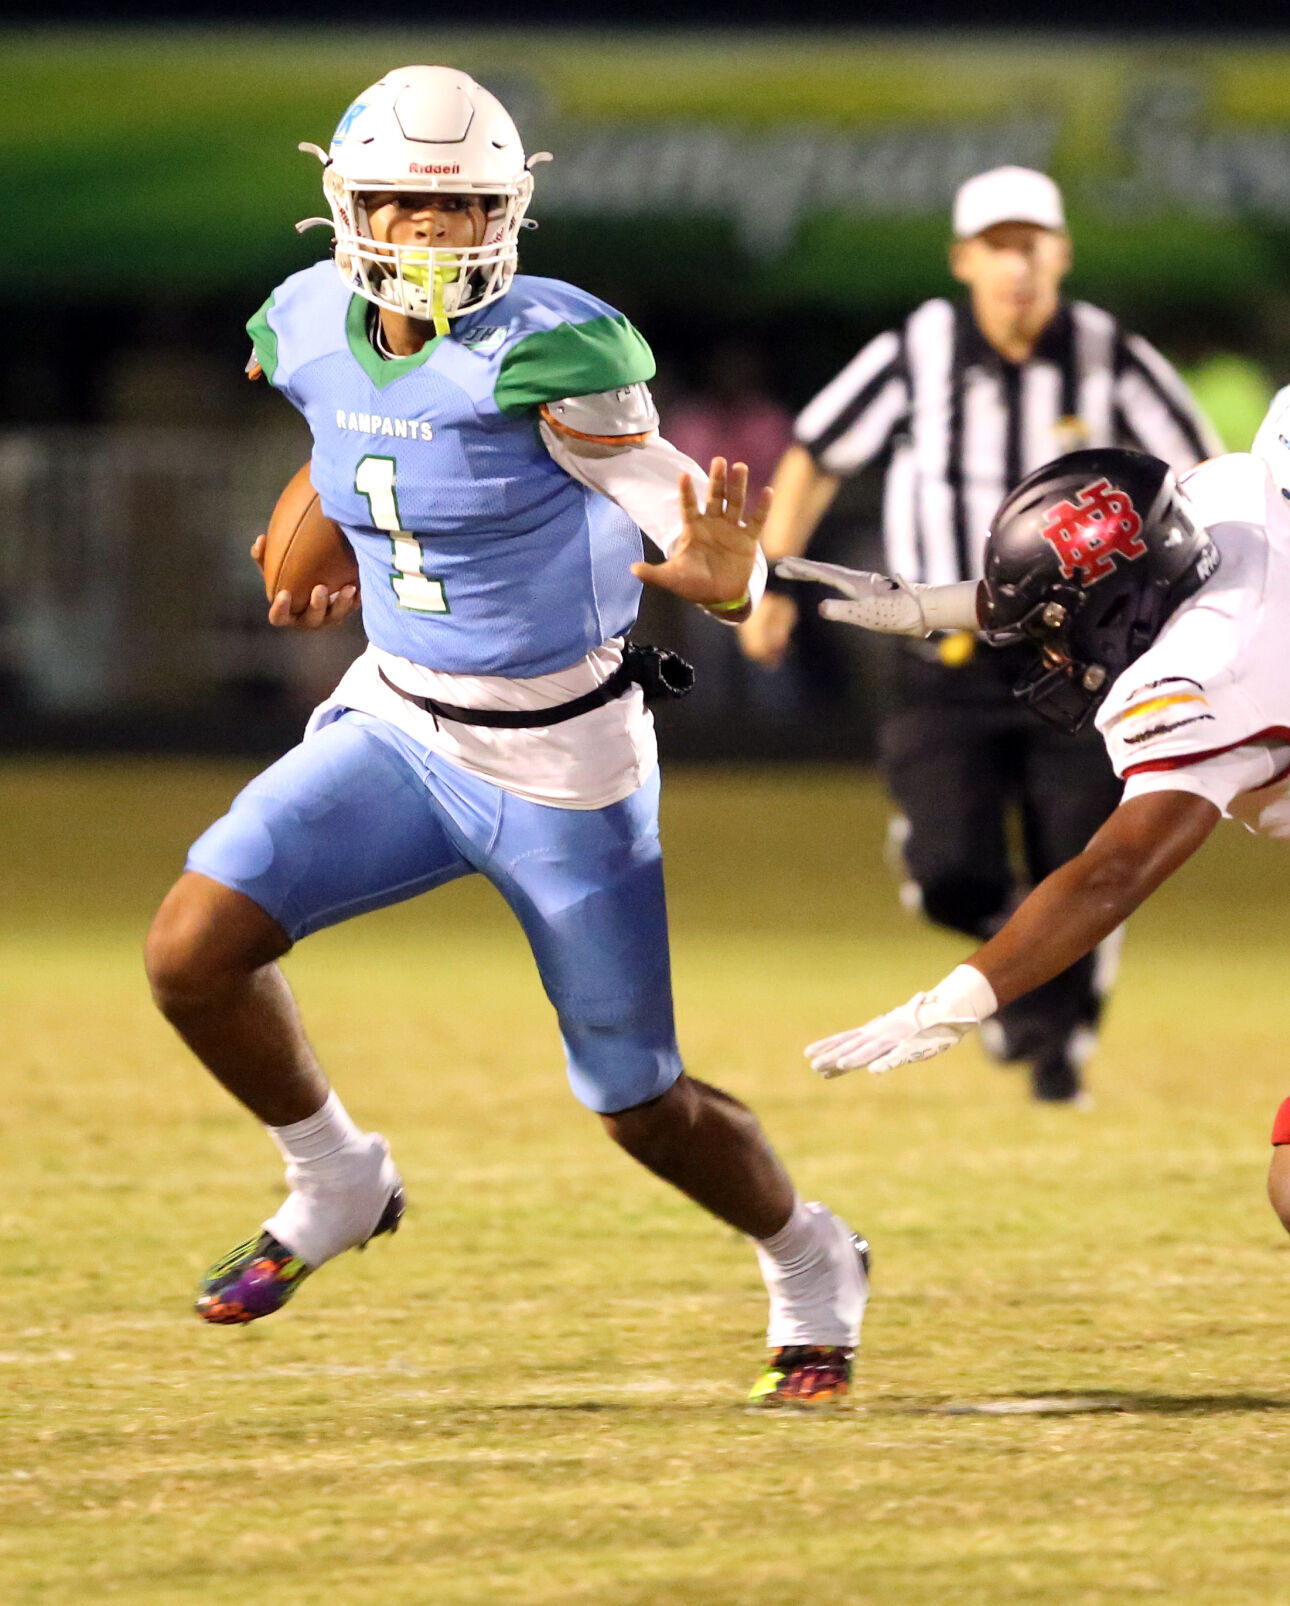 High school football: Rampants bounced from 3A playoffs in 2nd loss to Havelock